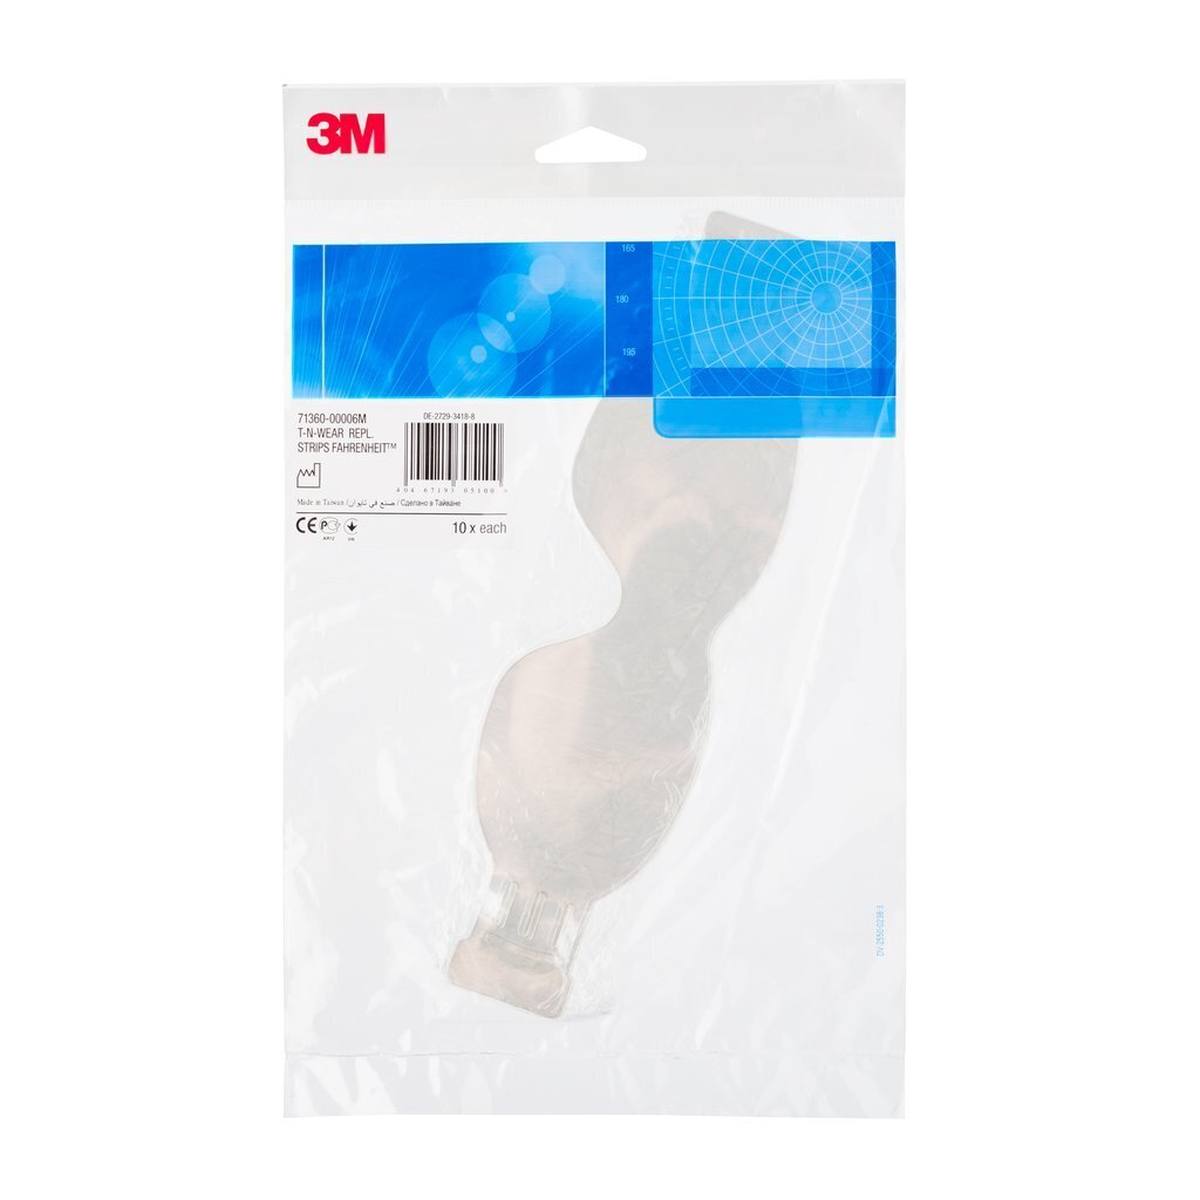 3M Fahrenheit replacement protective strips TNWEAR